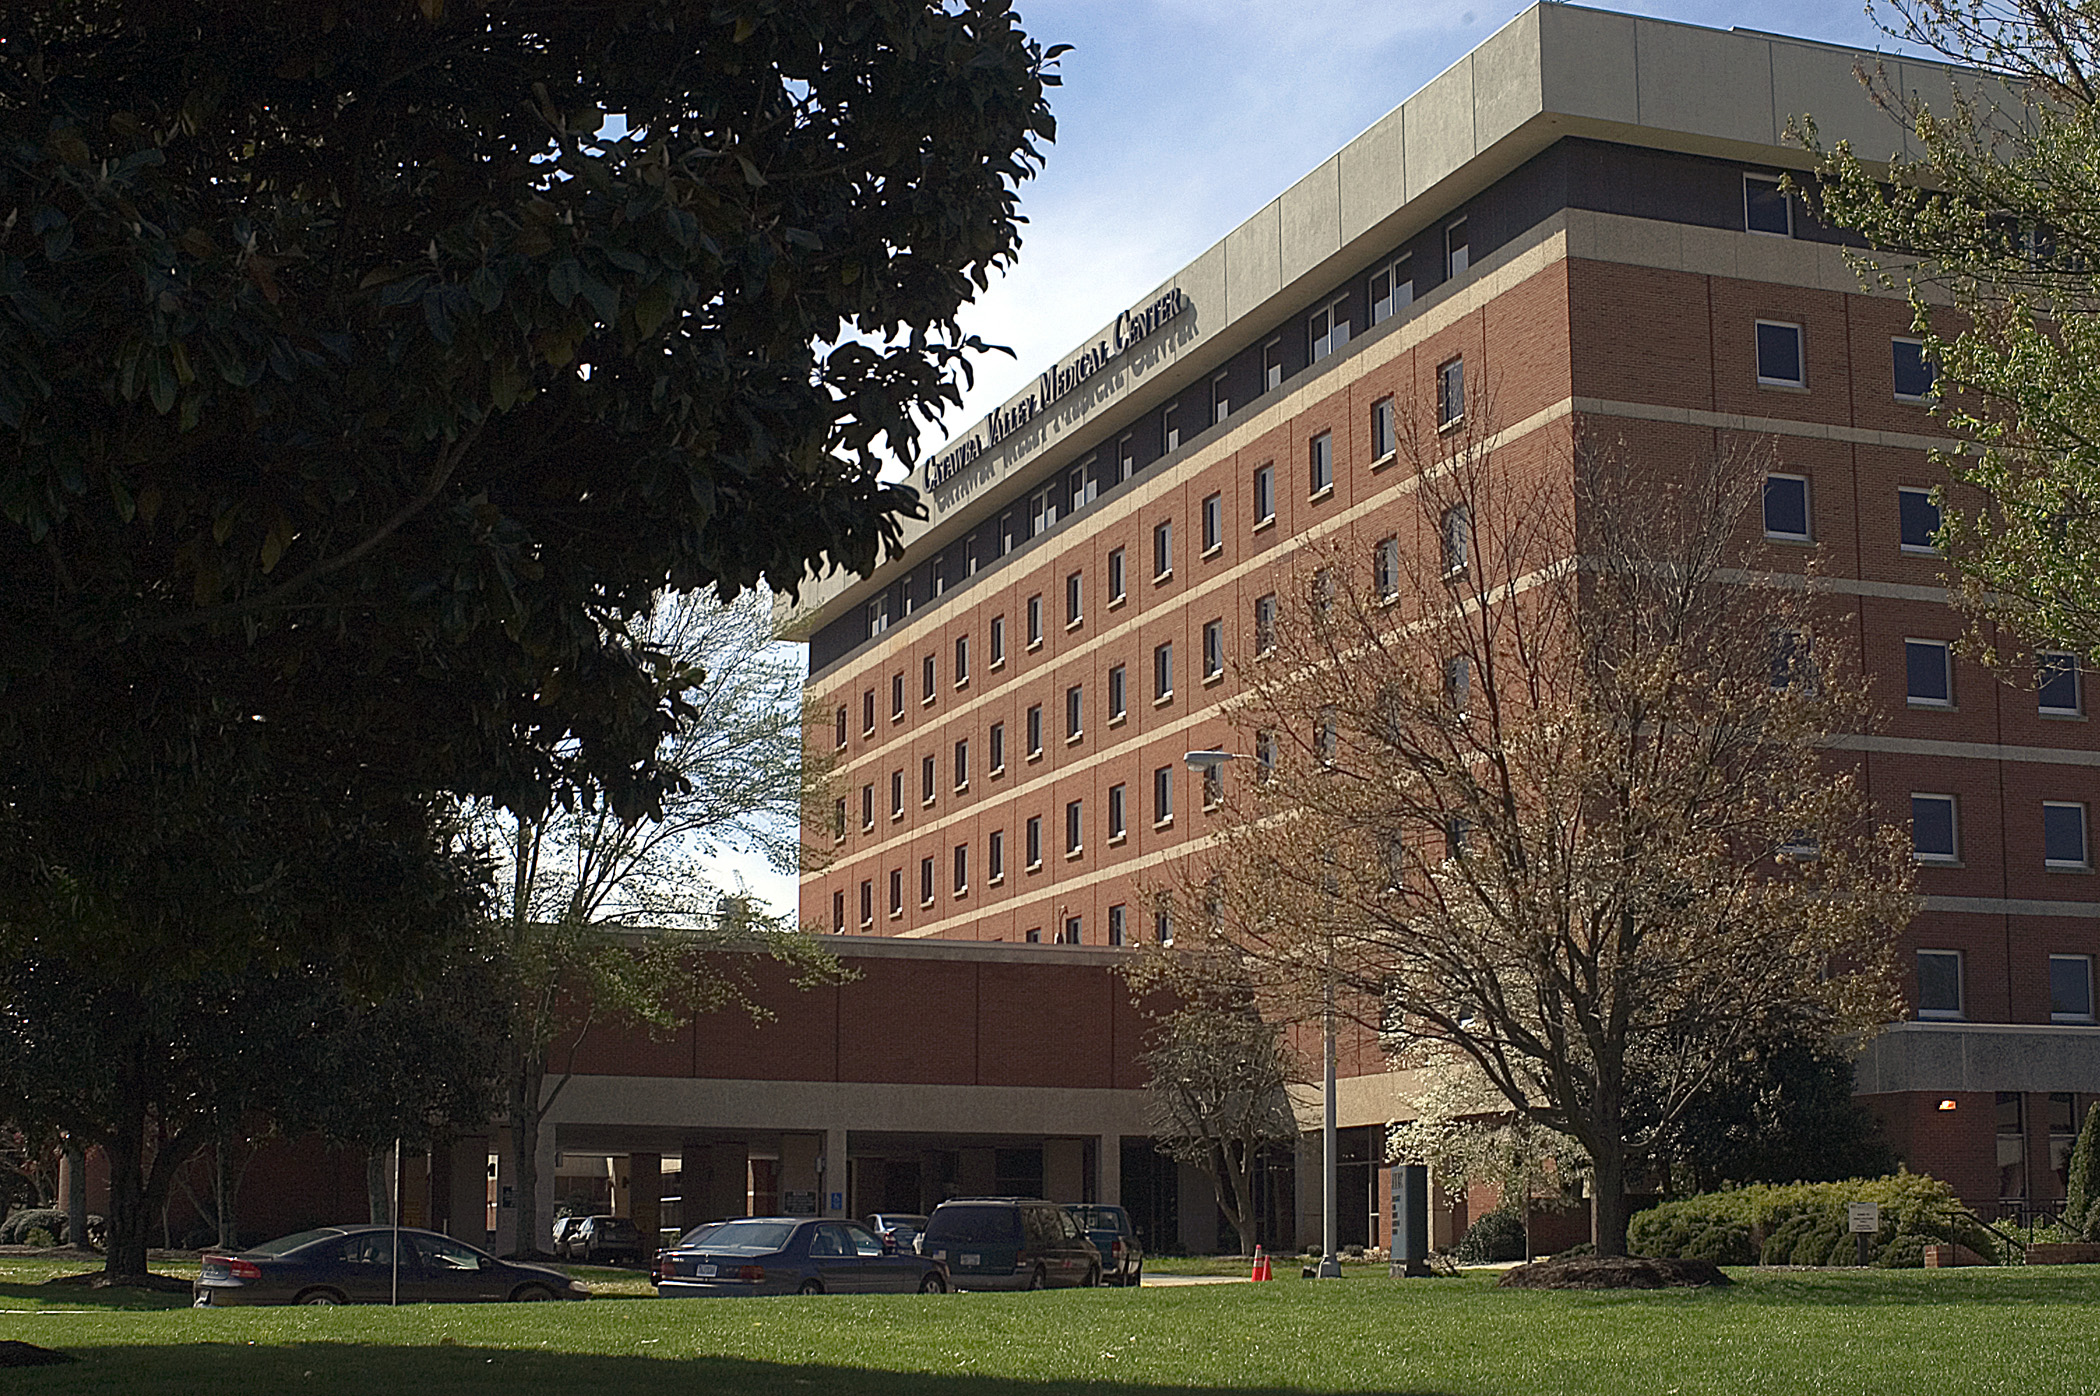 Catawba Valley Medical Center is one of two hospitals in Catawba County.